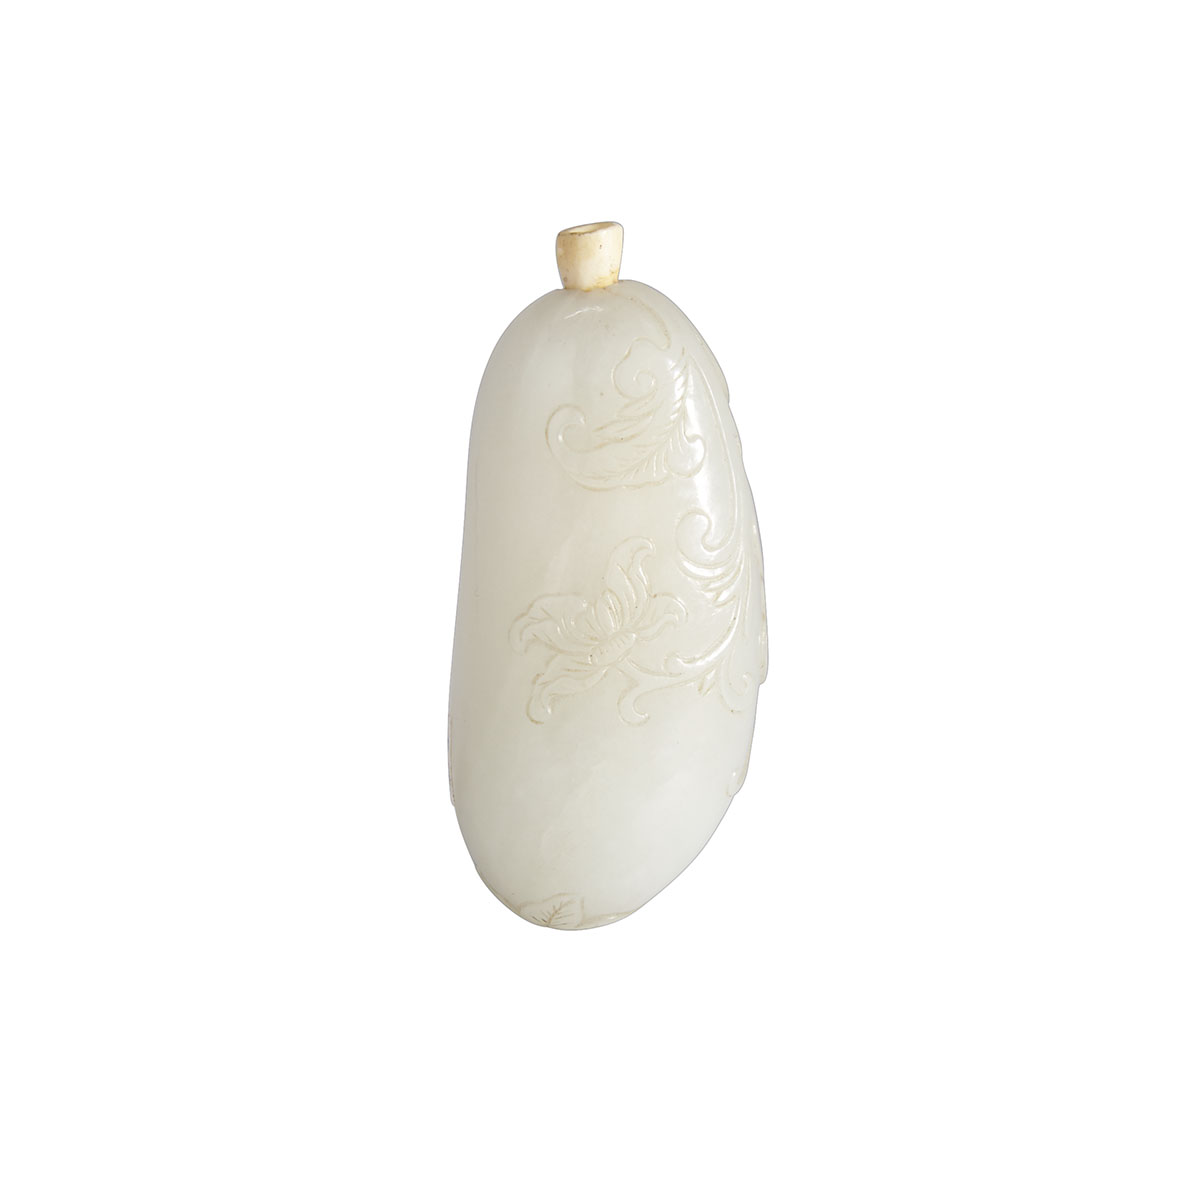 A Rare and Finely Carved White Jade Snuff Bottle, 19th Century, Circa 1820-1860